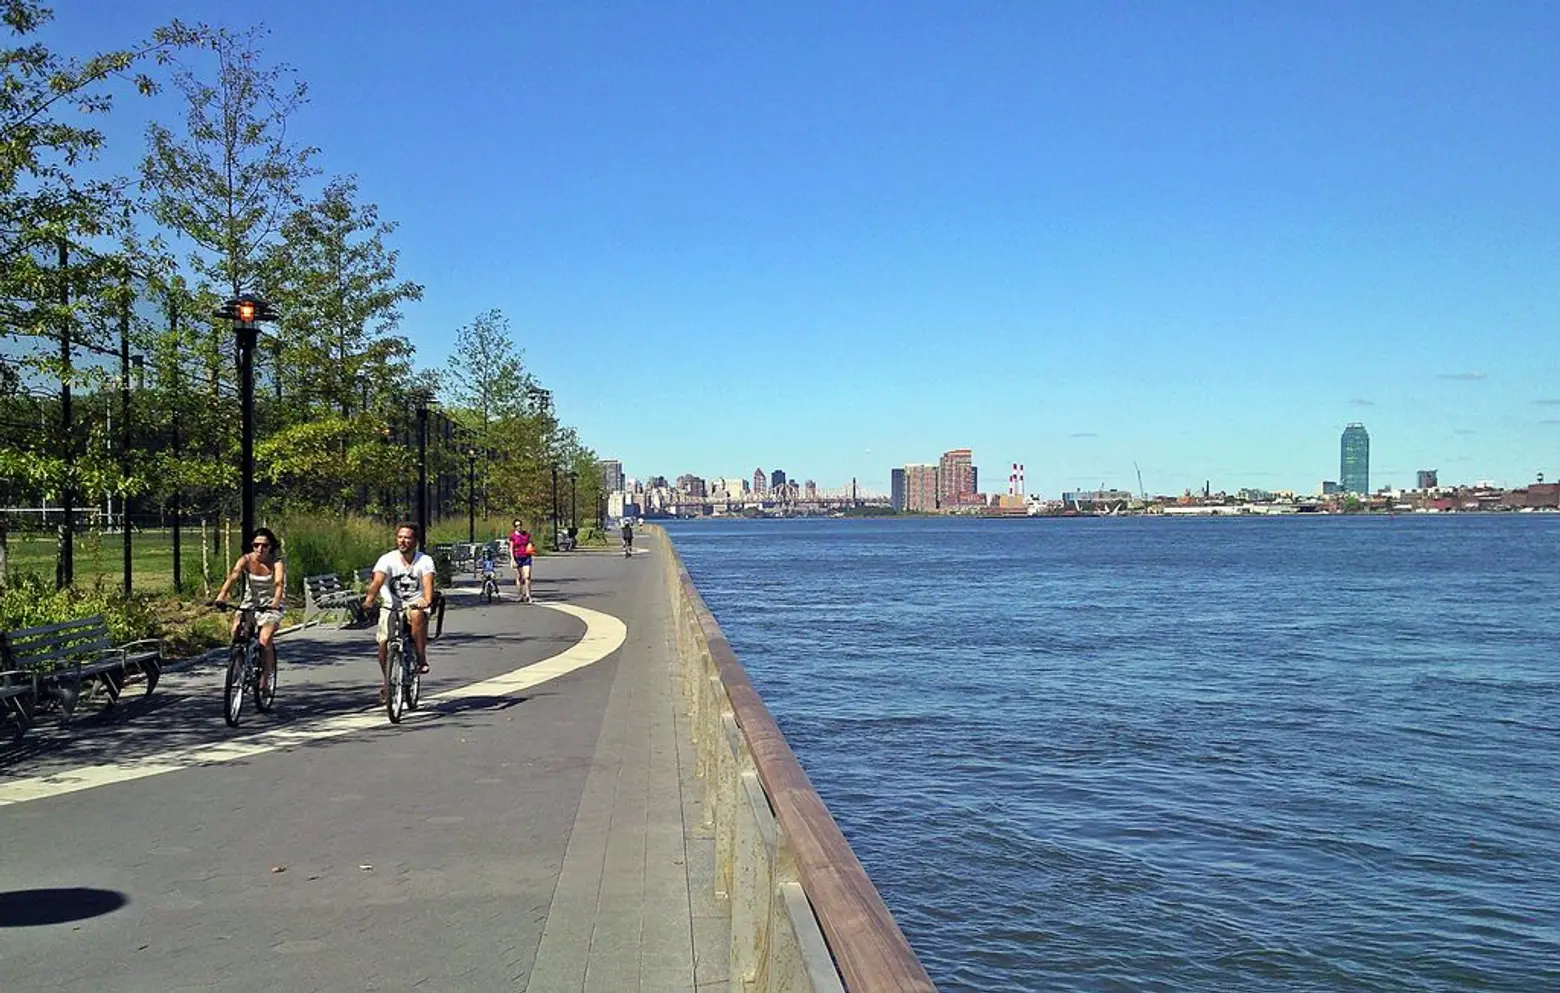 City’s new $1.45B East River Park flood protection plan leaves community groups high and dry